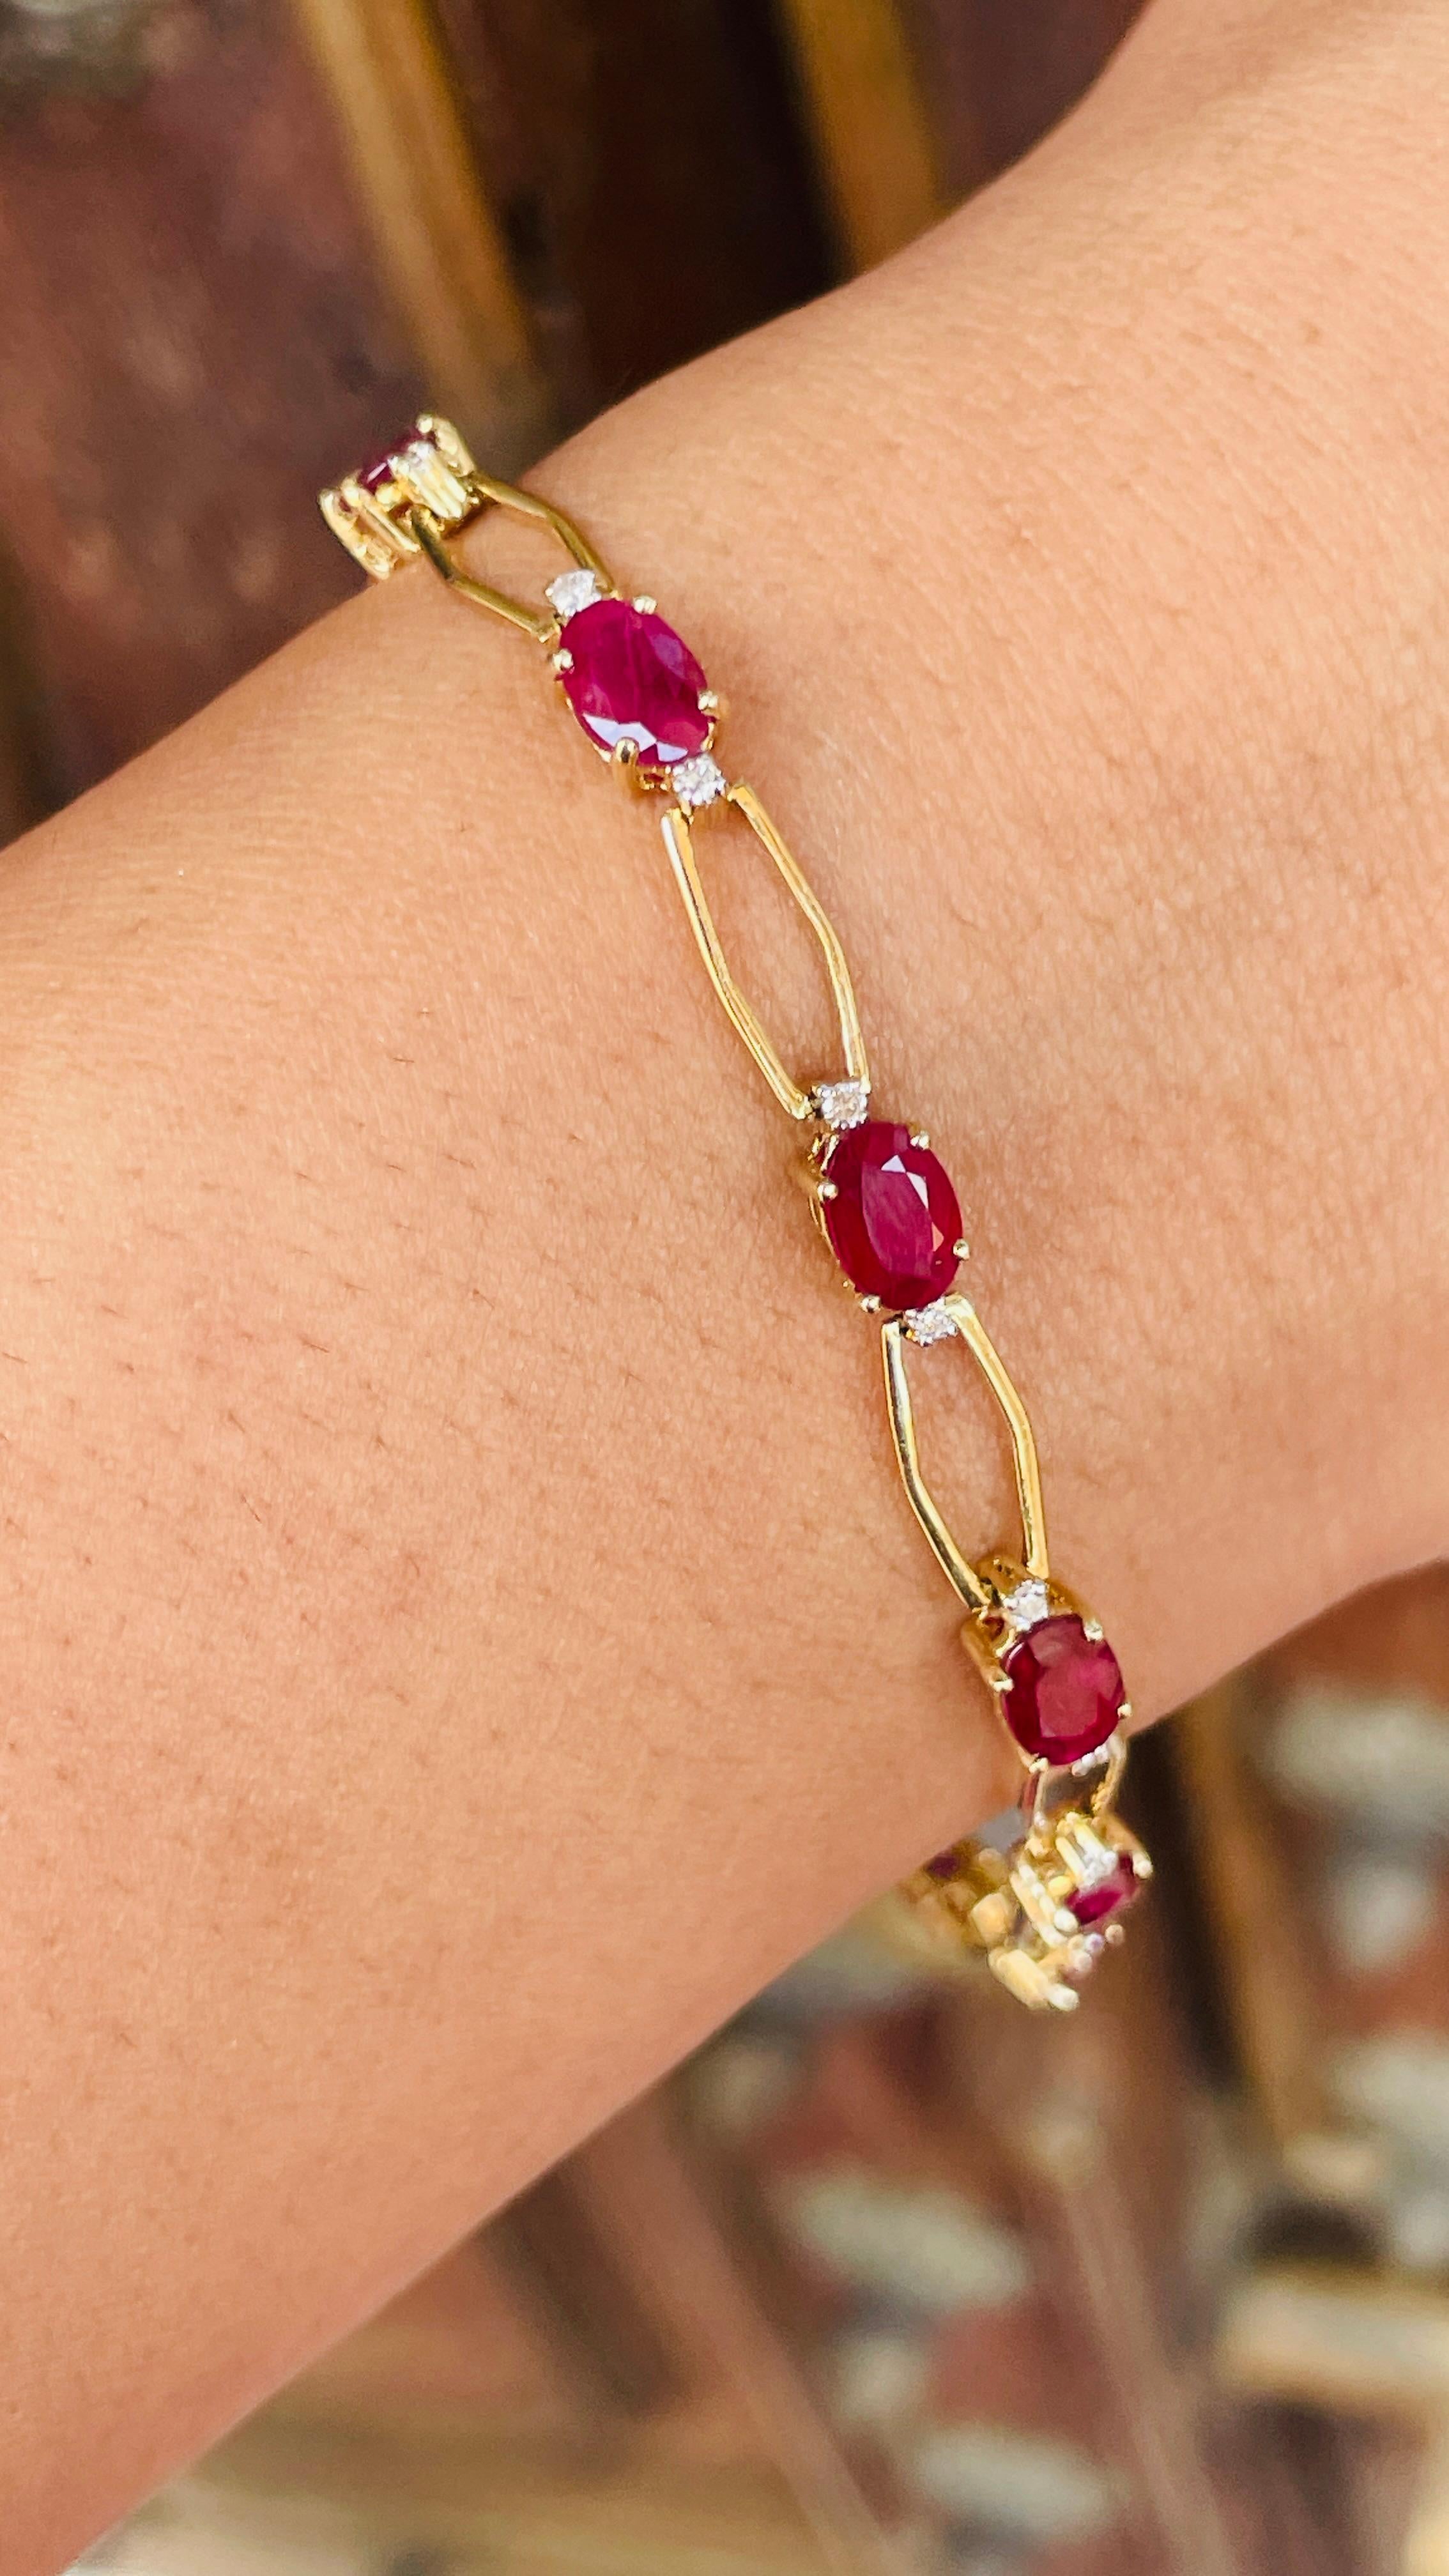 This Ruby Diamond Tennis Bracelet in 14K gold showcases 11 endlessly sparkling natural ruby, weighing 5.85 carat and 22 pieces of diamonds weighing 0.26 carat. It measures 7.5 inches long in length. 
Ruby improves mental strength. 
Designed with